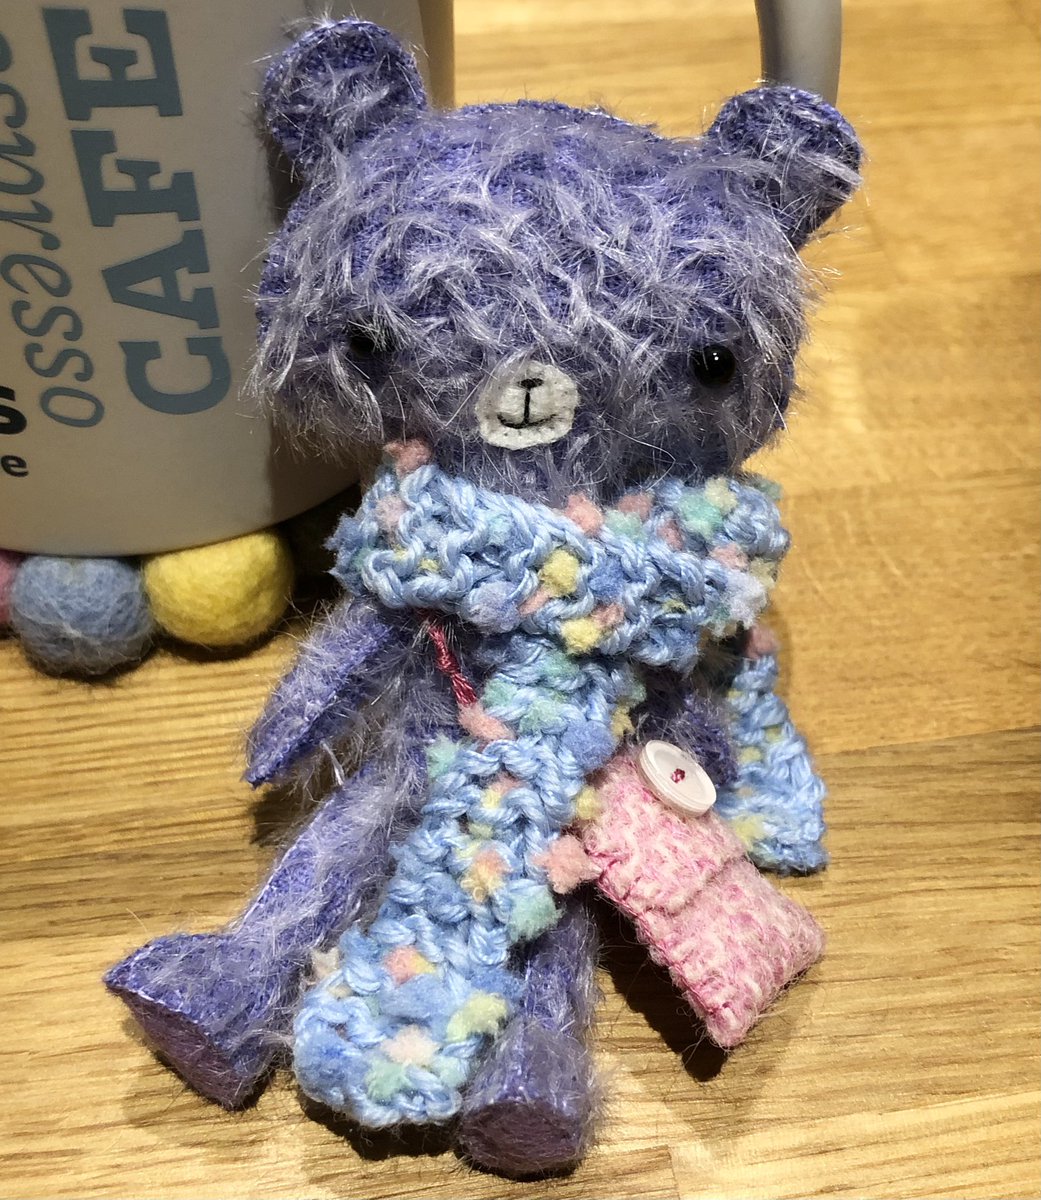 Little Bluebell is having her debut on my Etsy Shop today.
She carrying a cute pink Harris Tweed bag decorated with a white button to keep all her essentials in and a snuggly scarf.
#bears #CollectibleBears #handsewn #unique #bear #mohairbear #collectorsbear